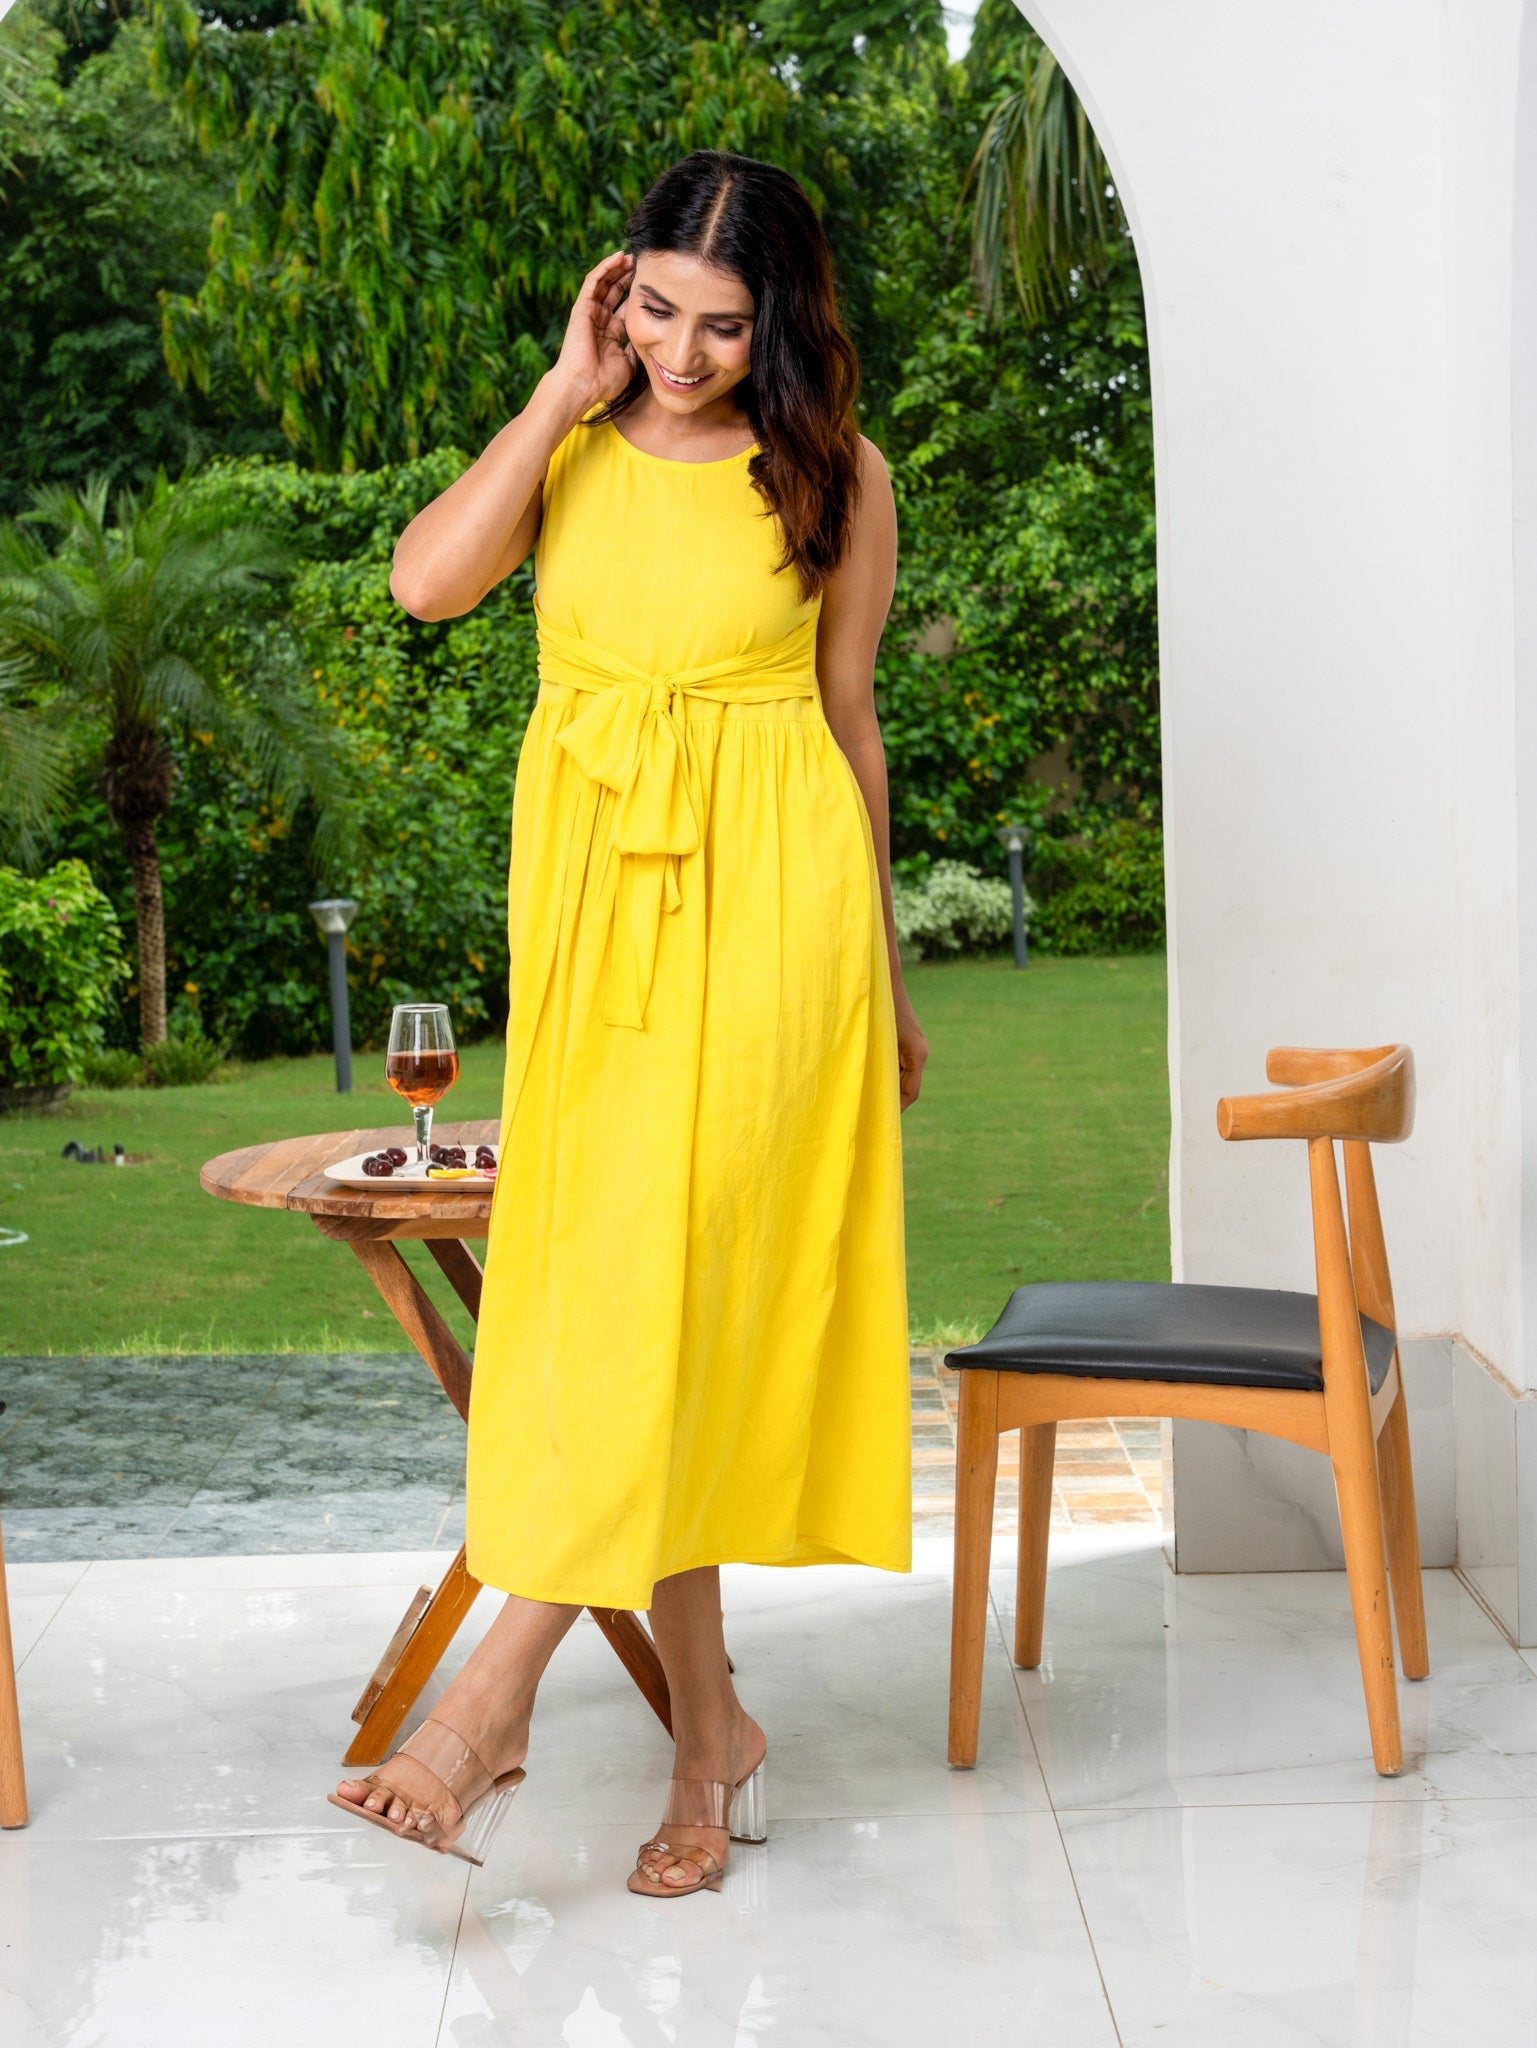 Sunshine-yellow Hand-dyed Gown Style Dress in Handloom Cotton - Spin Wheel